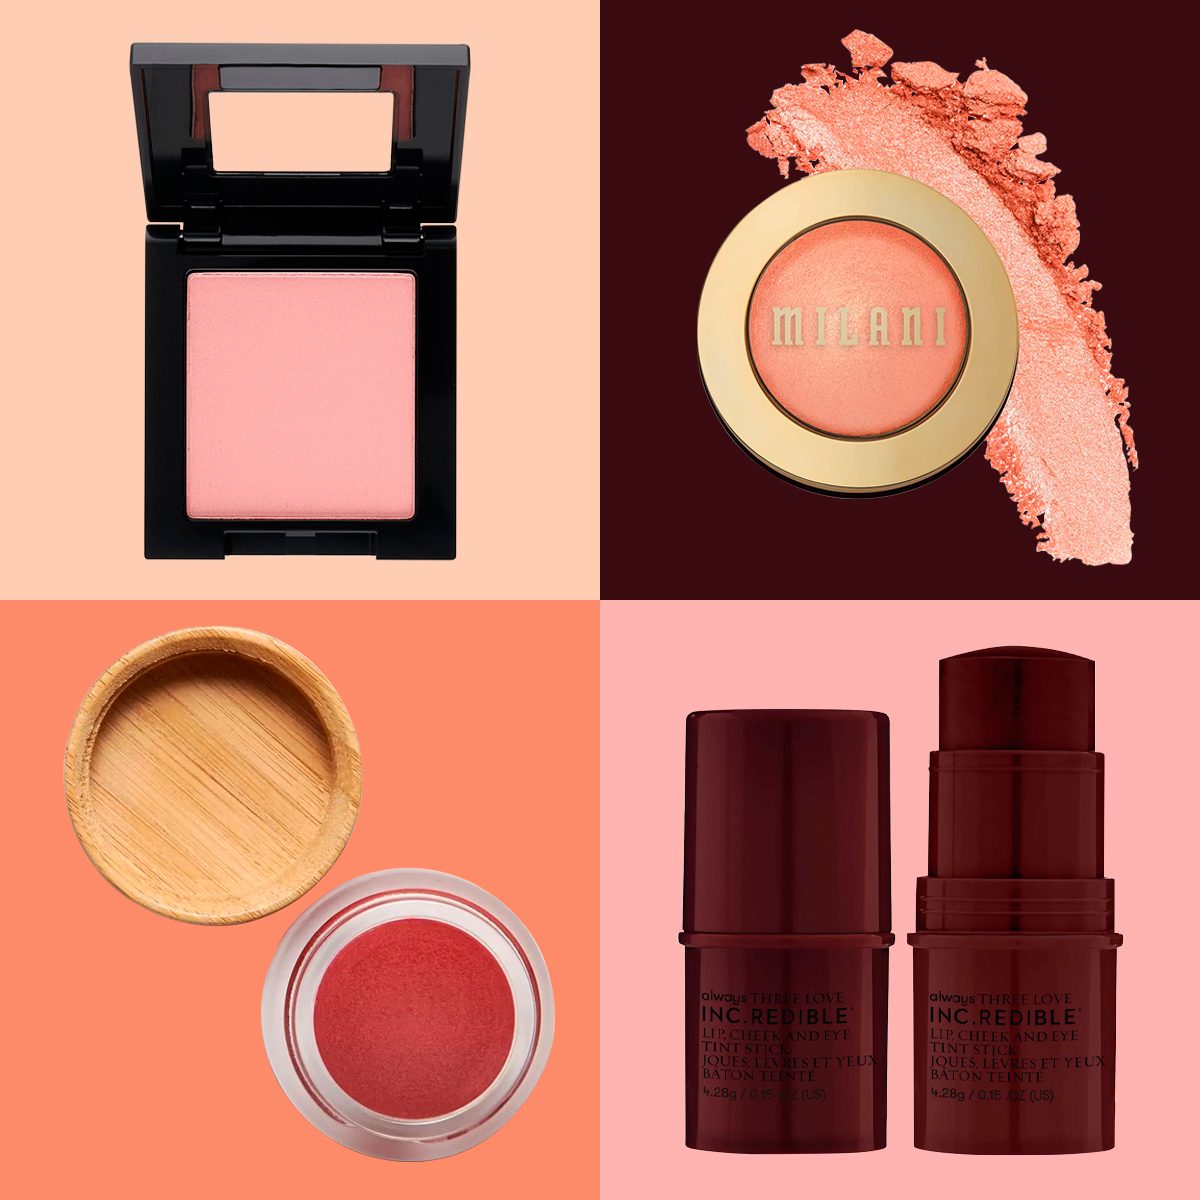 Understanding your skin type and choosing the right blush for it